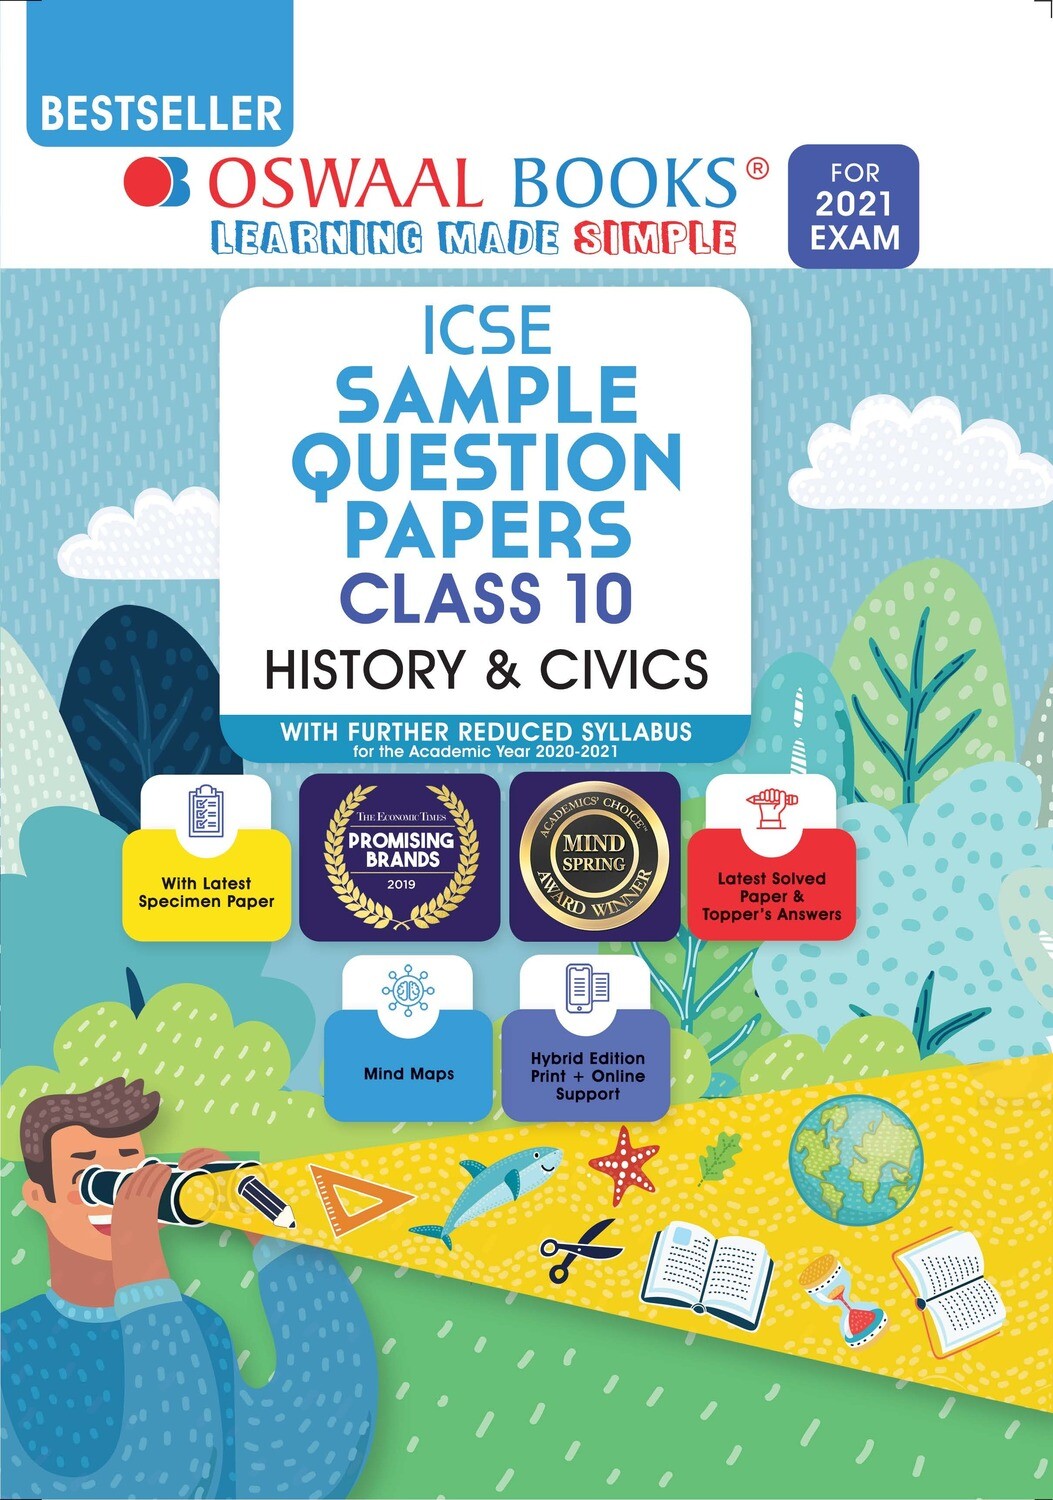 Buy e-book: Oswaal ICSE Sample Question Papers Class 10 History & Civics (Reduced Syllabus for 2021 Exam)